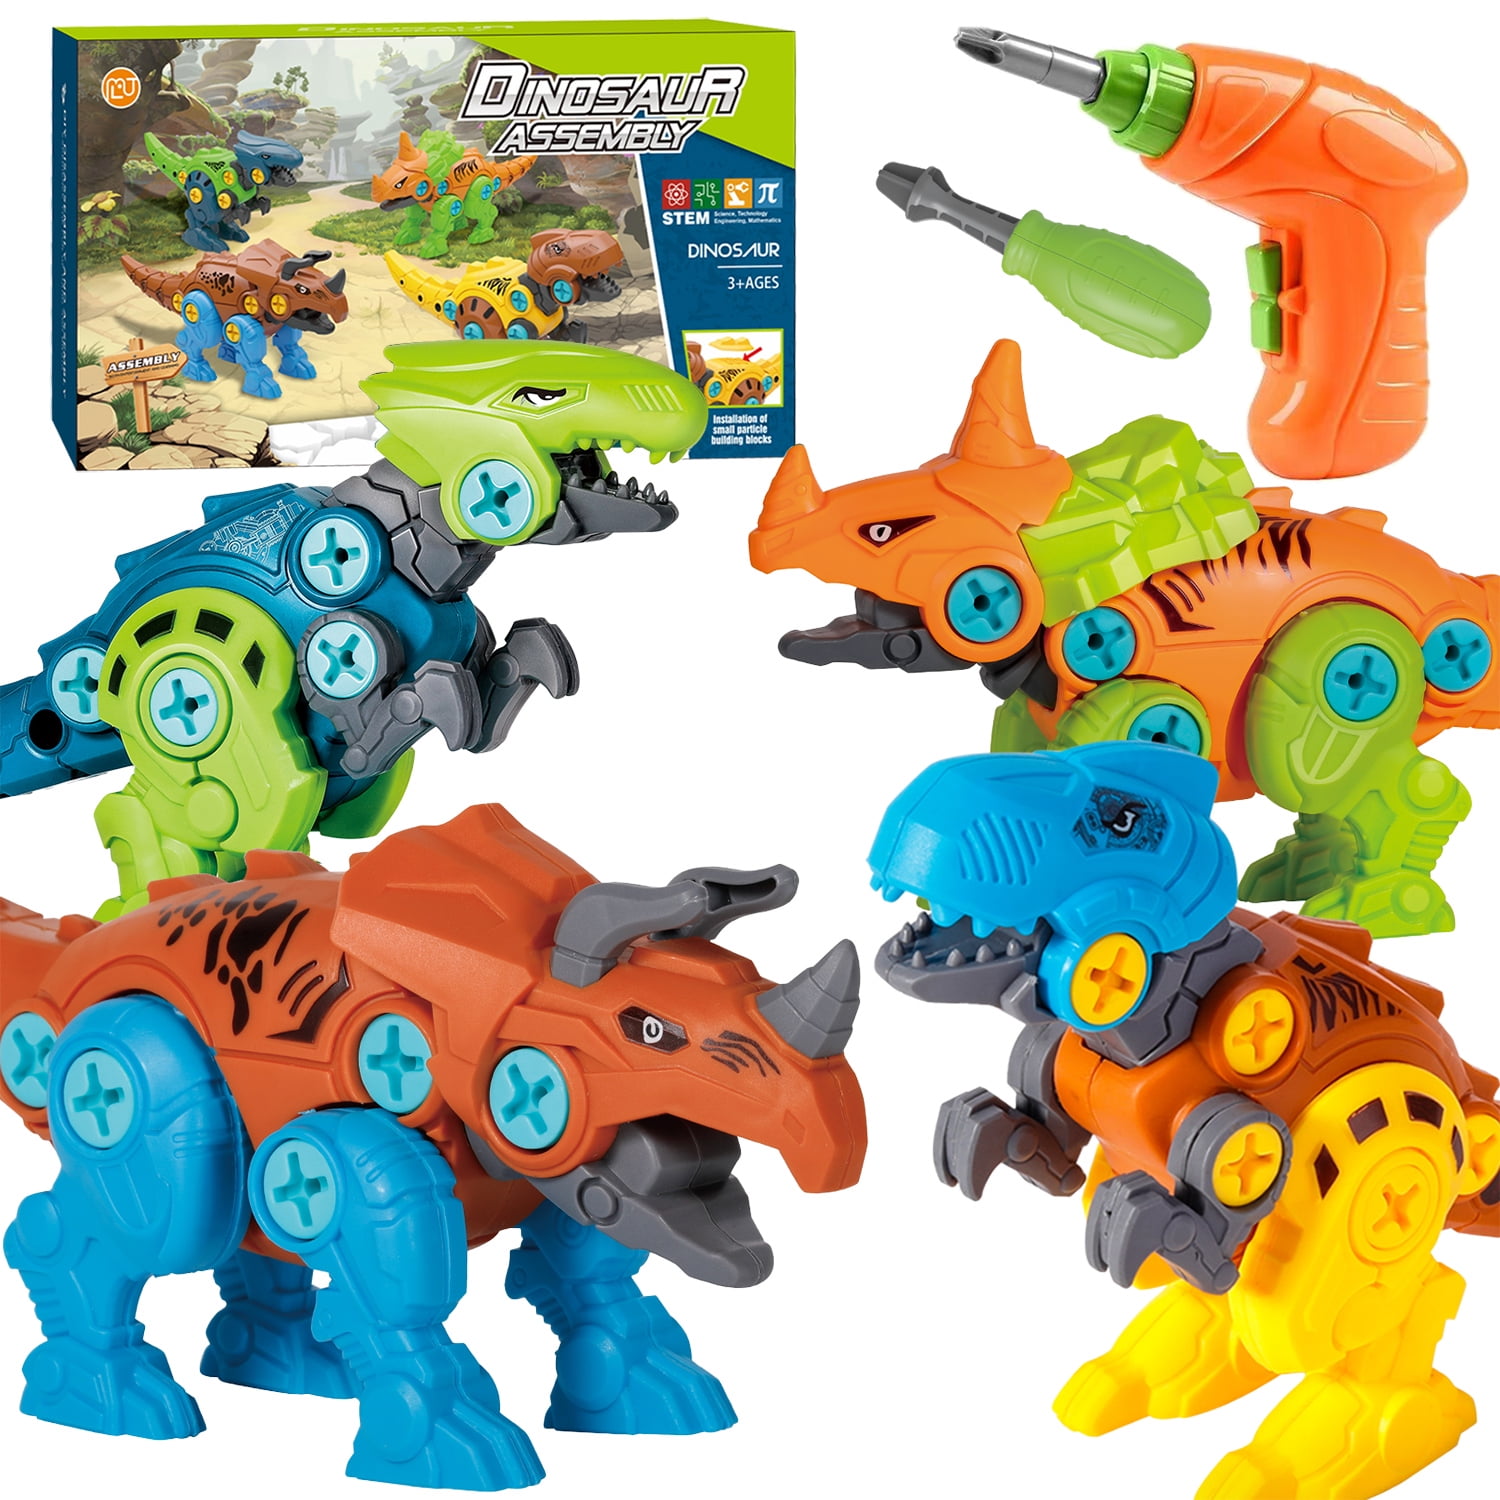 Building Toy Set Learning Gifts for Boys and Girls Construction Play Kit Take Apart Toys with Electric Drill VNVDFLM 3 Pcs Take Apart Dinosaur Toys for Kids Age 3 4 5 6 7 L-r3, Red, Green, Brown